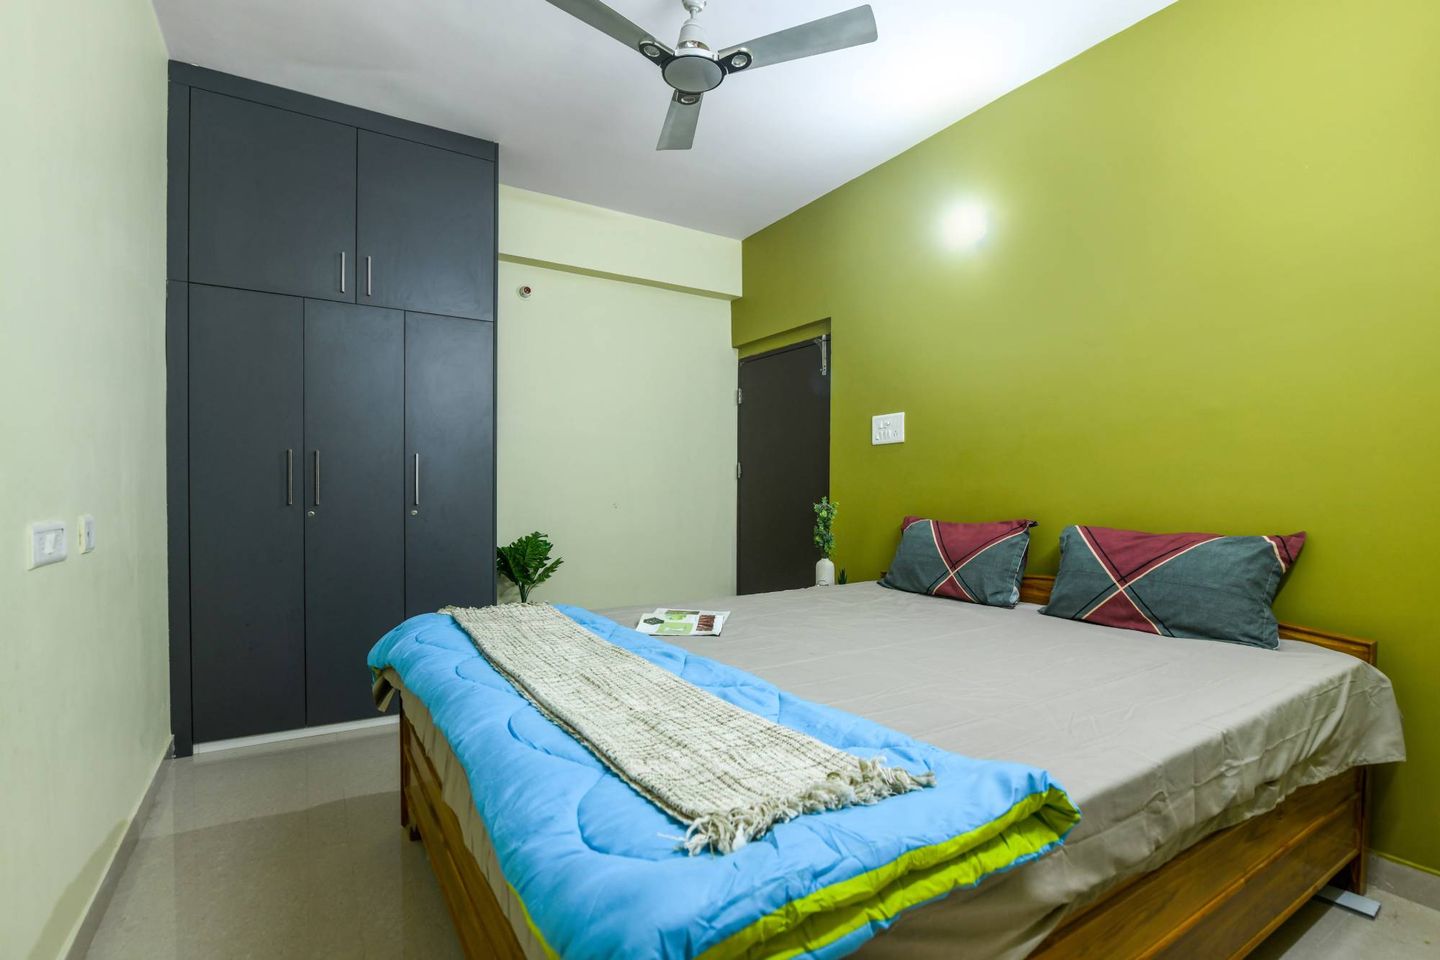 Modern Guest Room Design With Lime Green Accent Wall